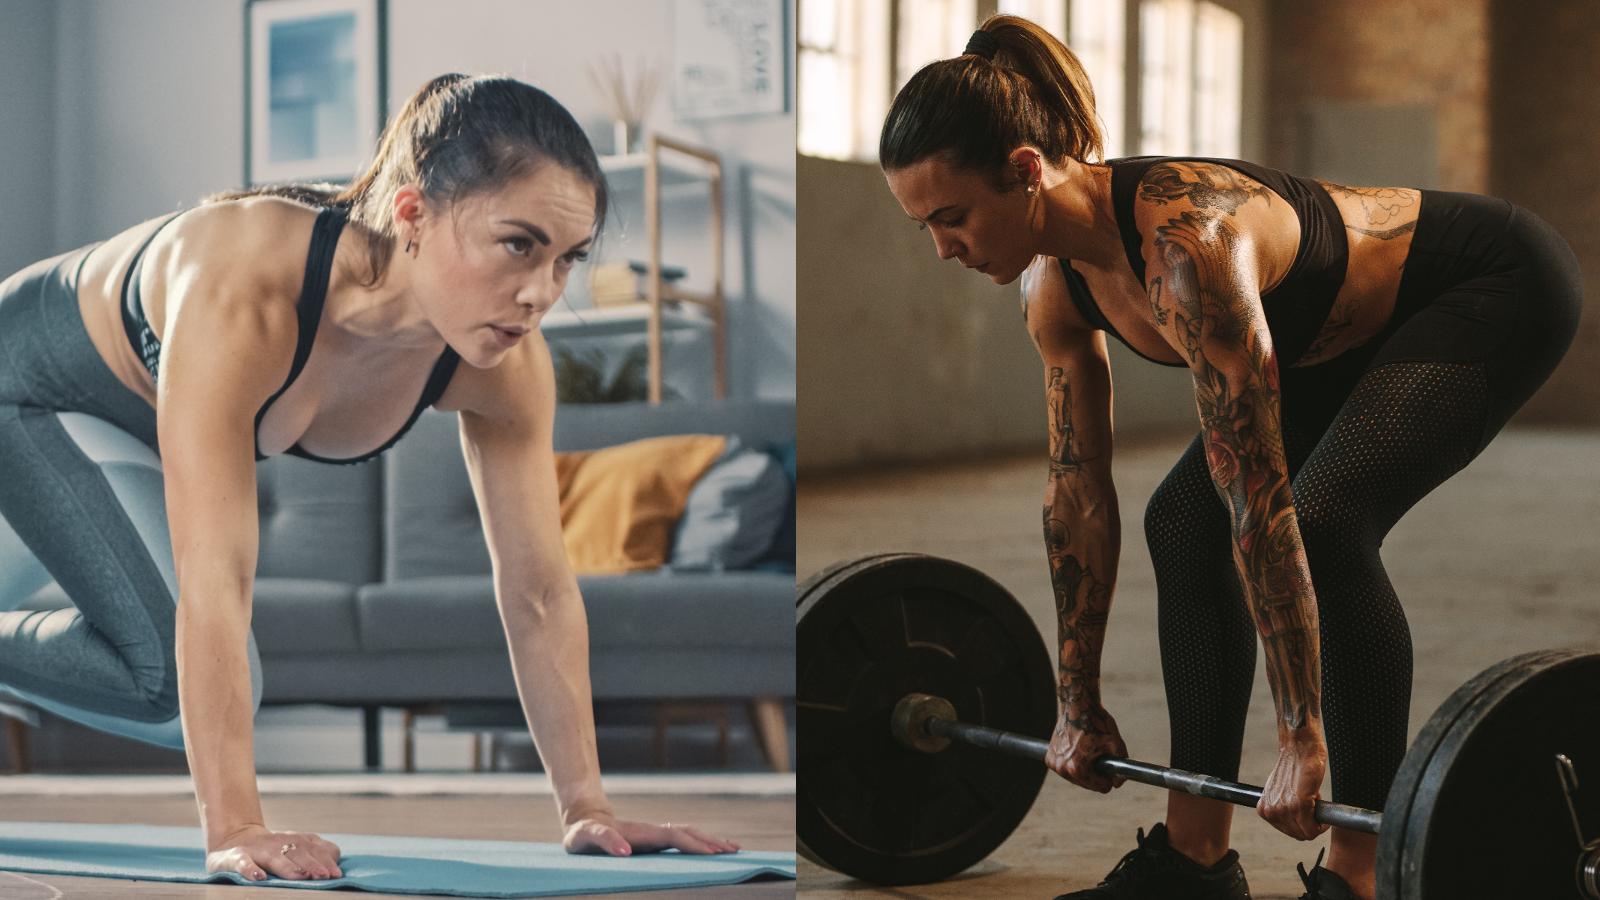 Cardio or weightlifting: Which is more effective for weight loss?